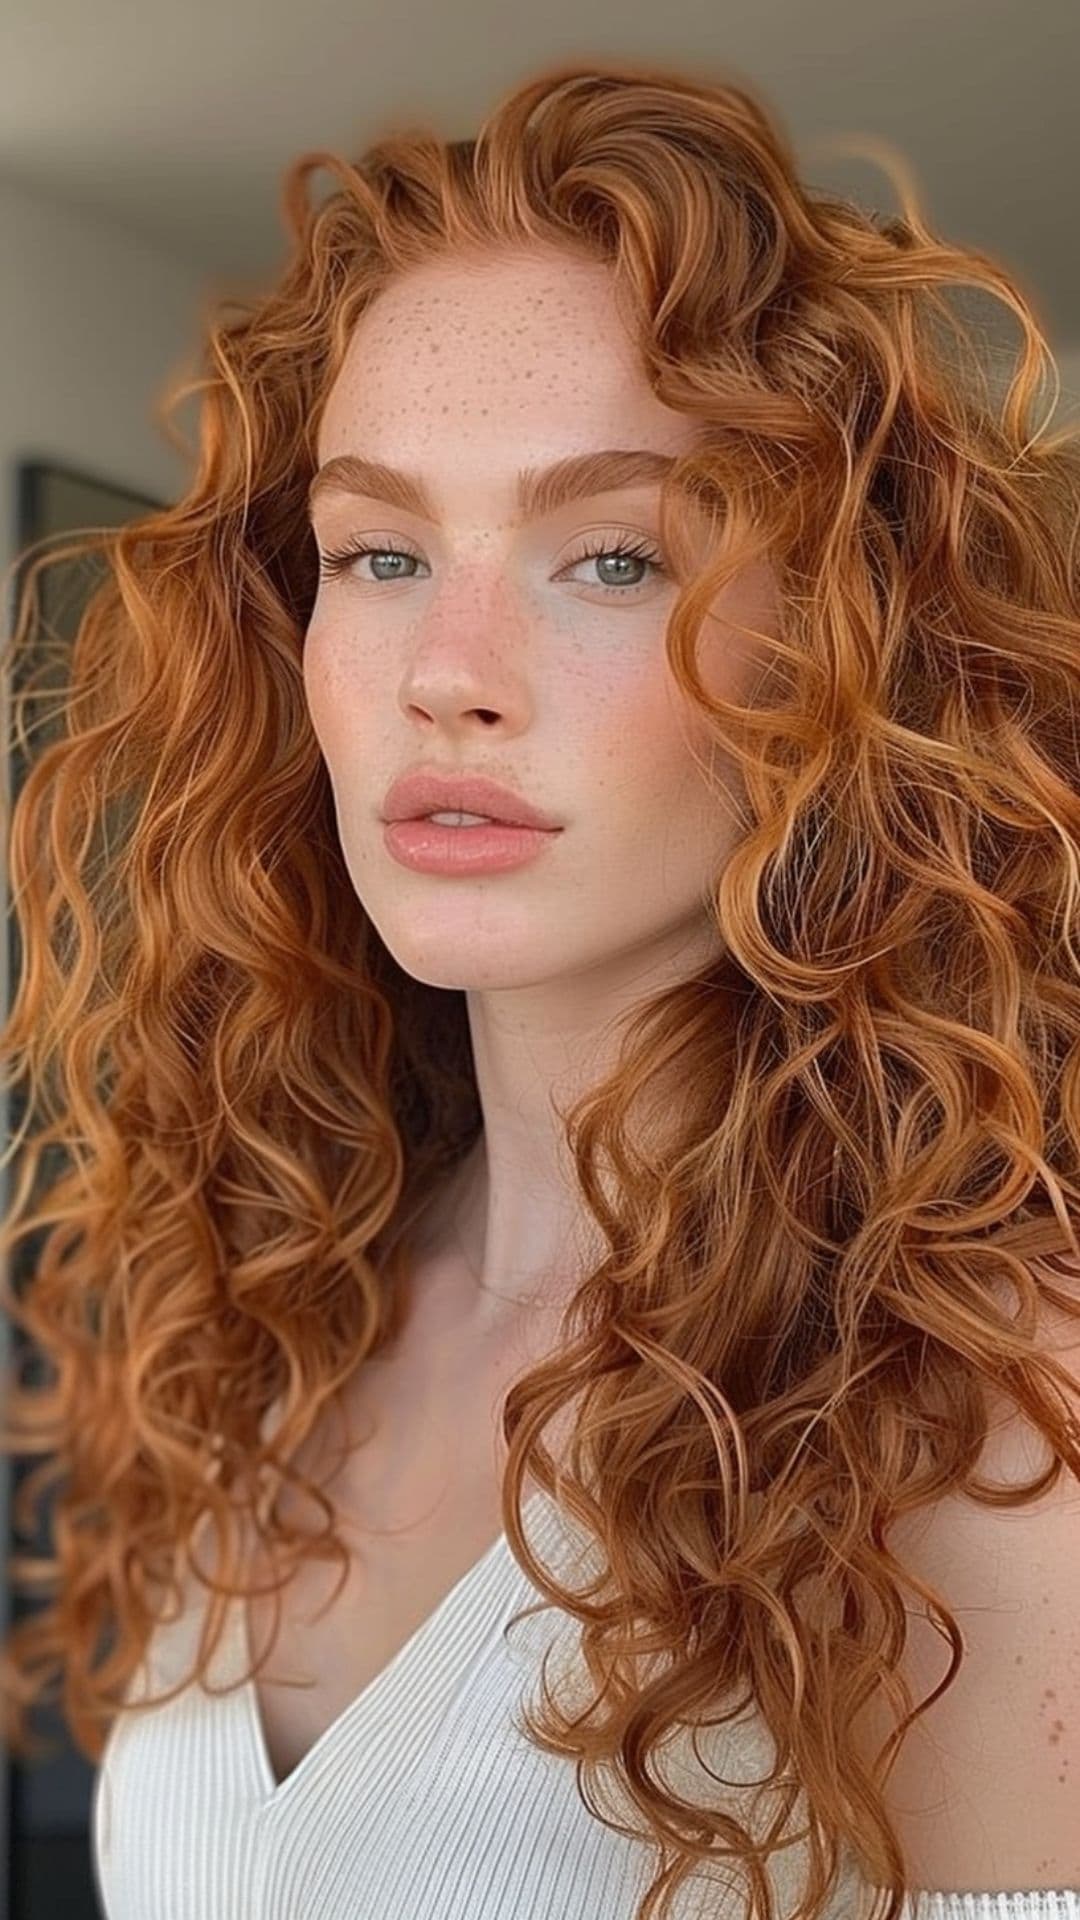 A woman modelling a ginger spice curly hair.